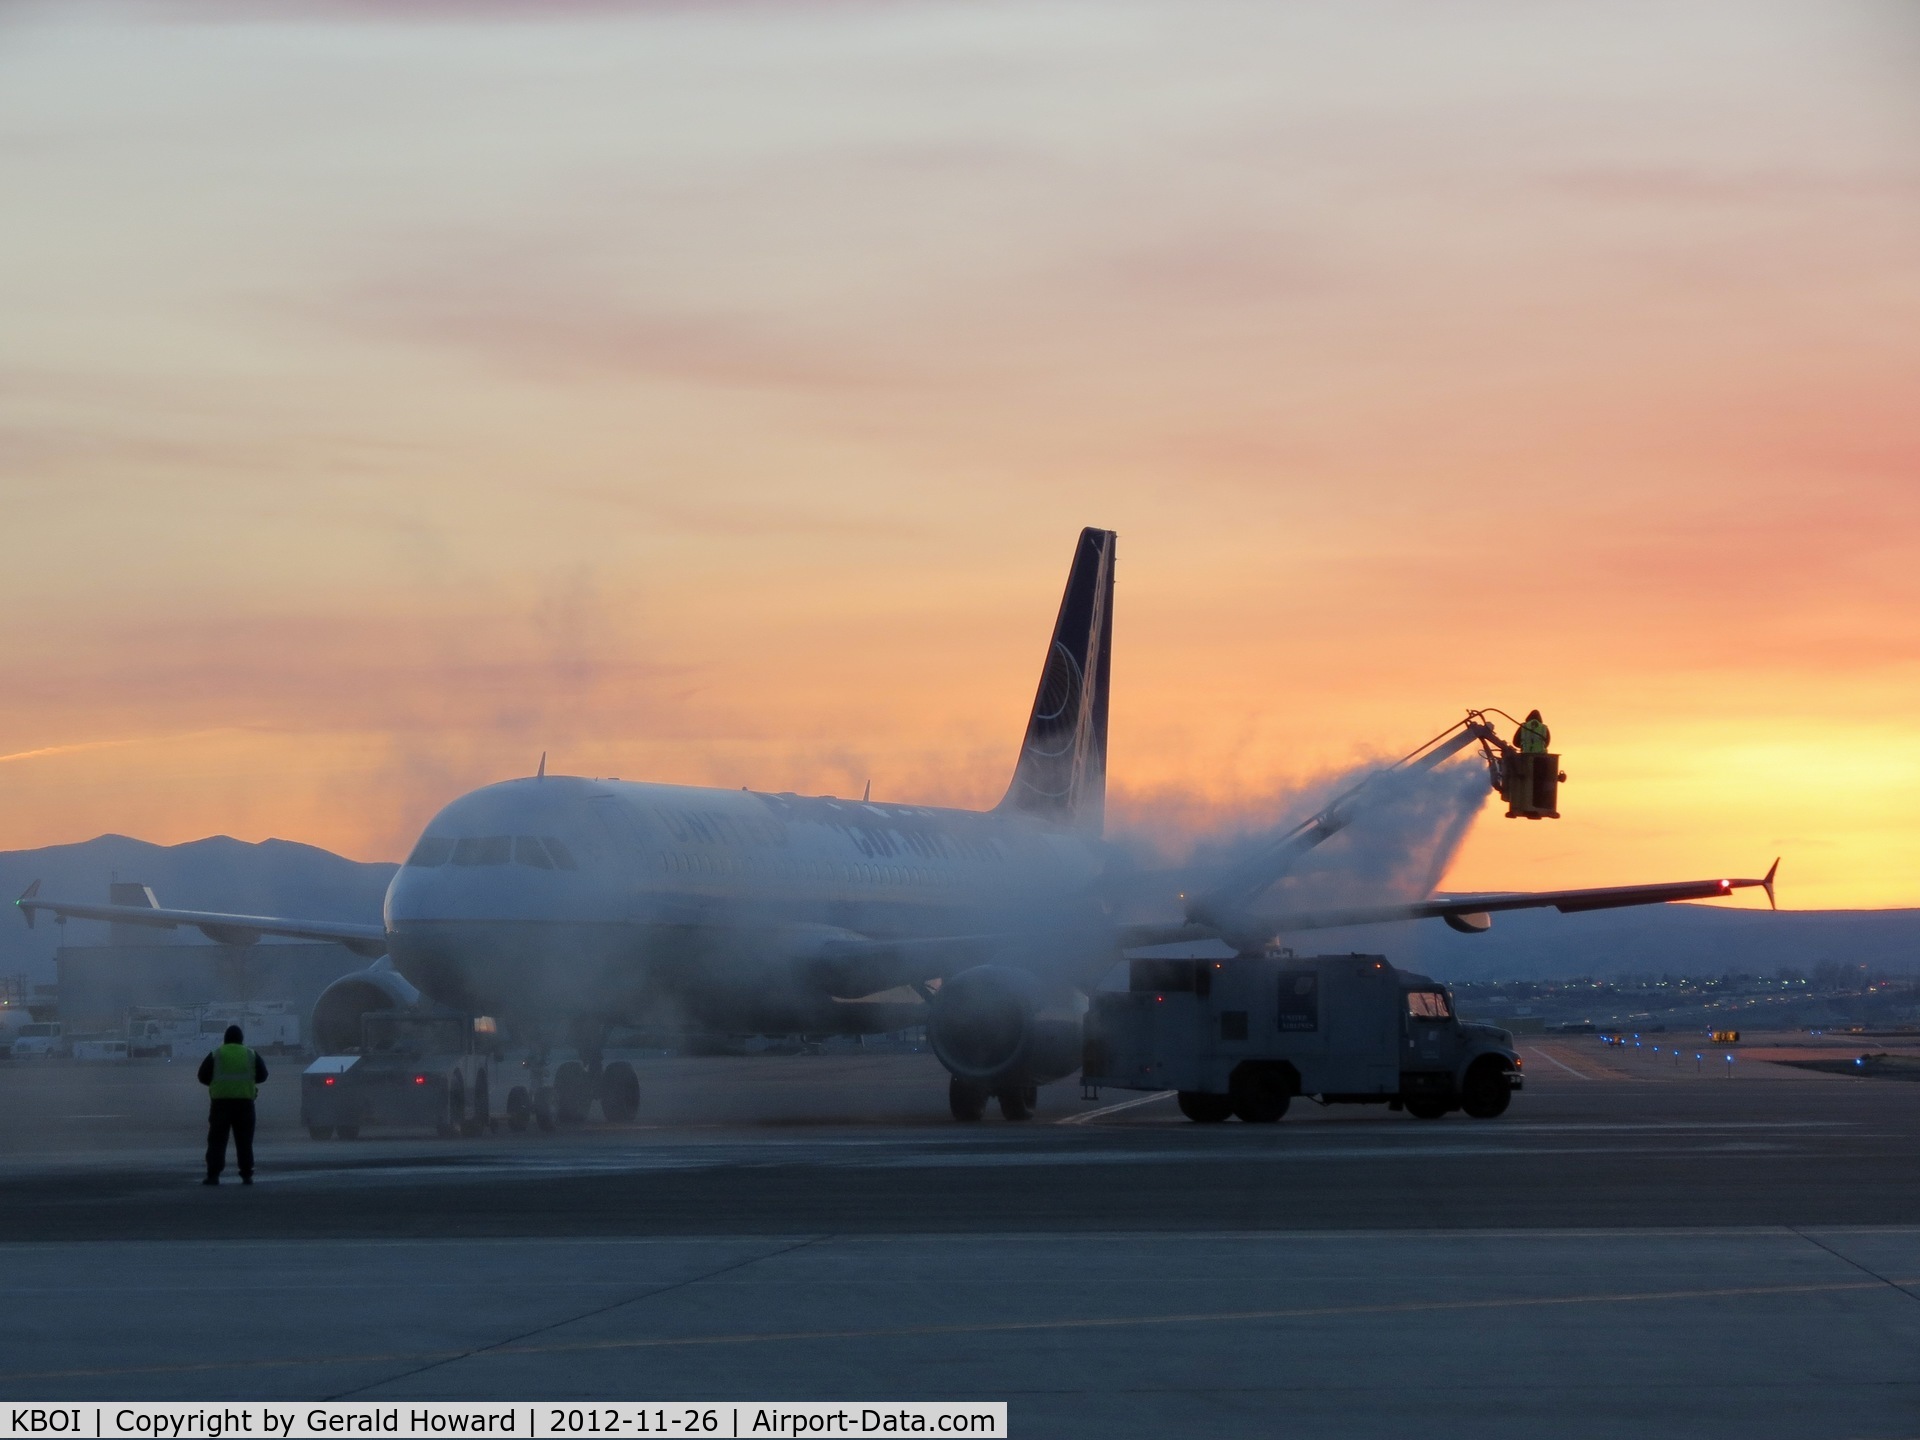 Boise Air Terminal/gowen Fld Airport (BOI) - Early morning de ice for United.